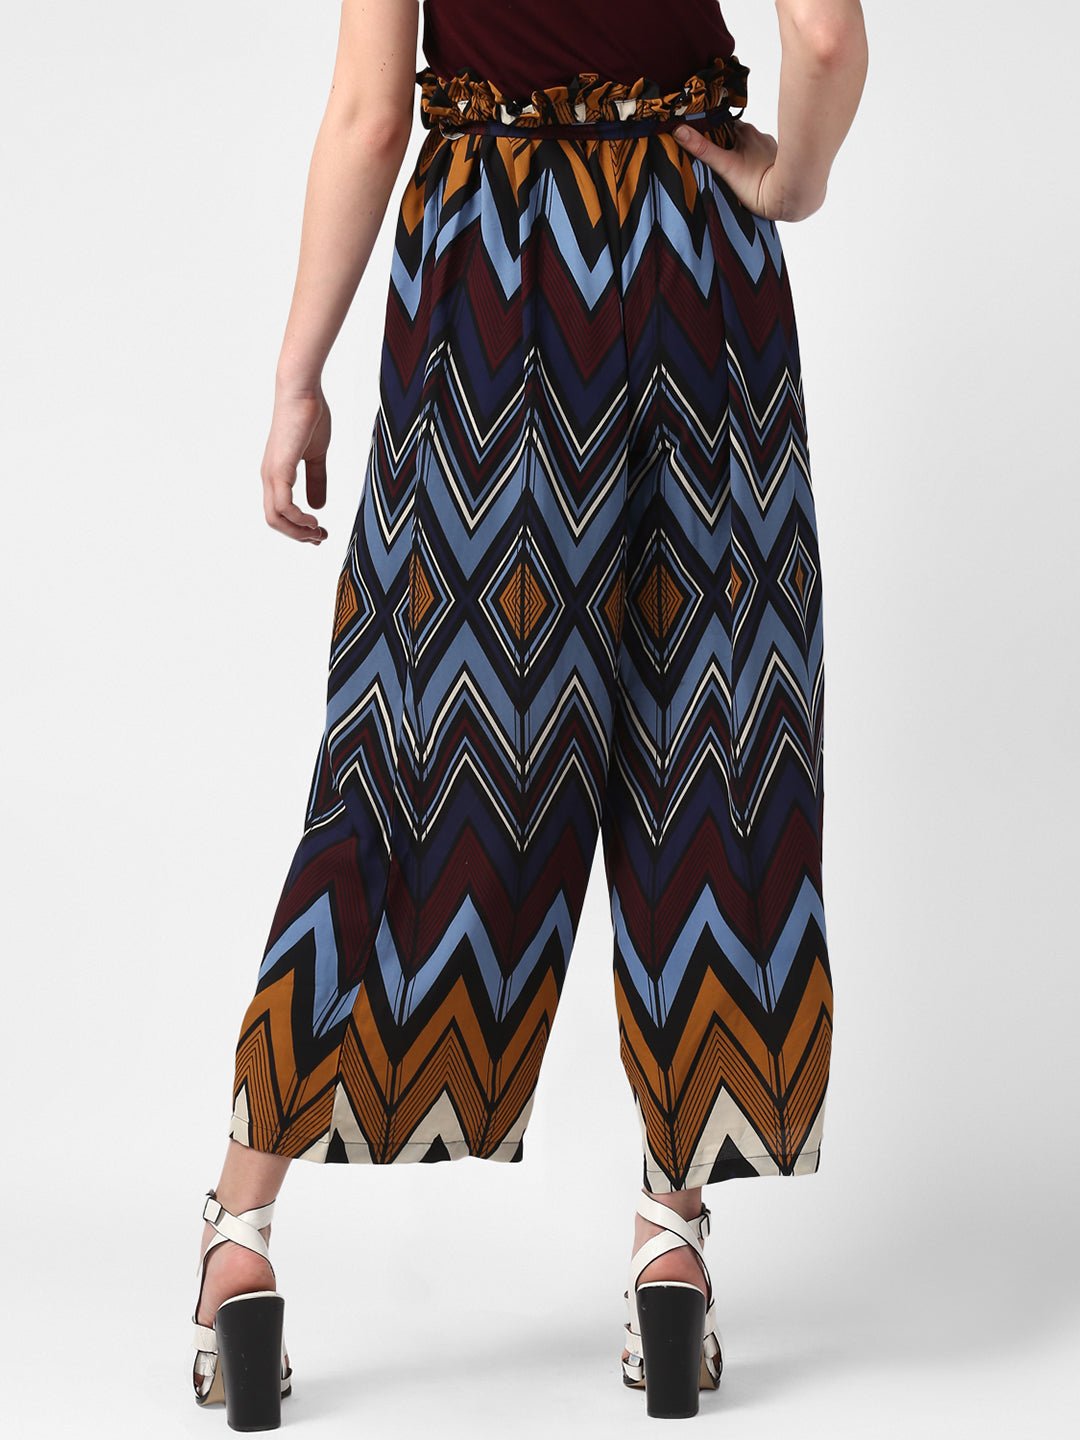 Women's MultiColour Chevron Print Paperbag Pants with elasticated waistband